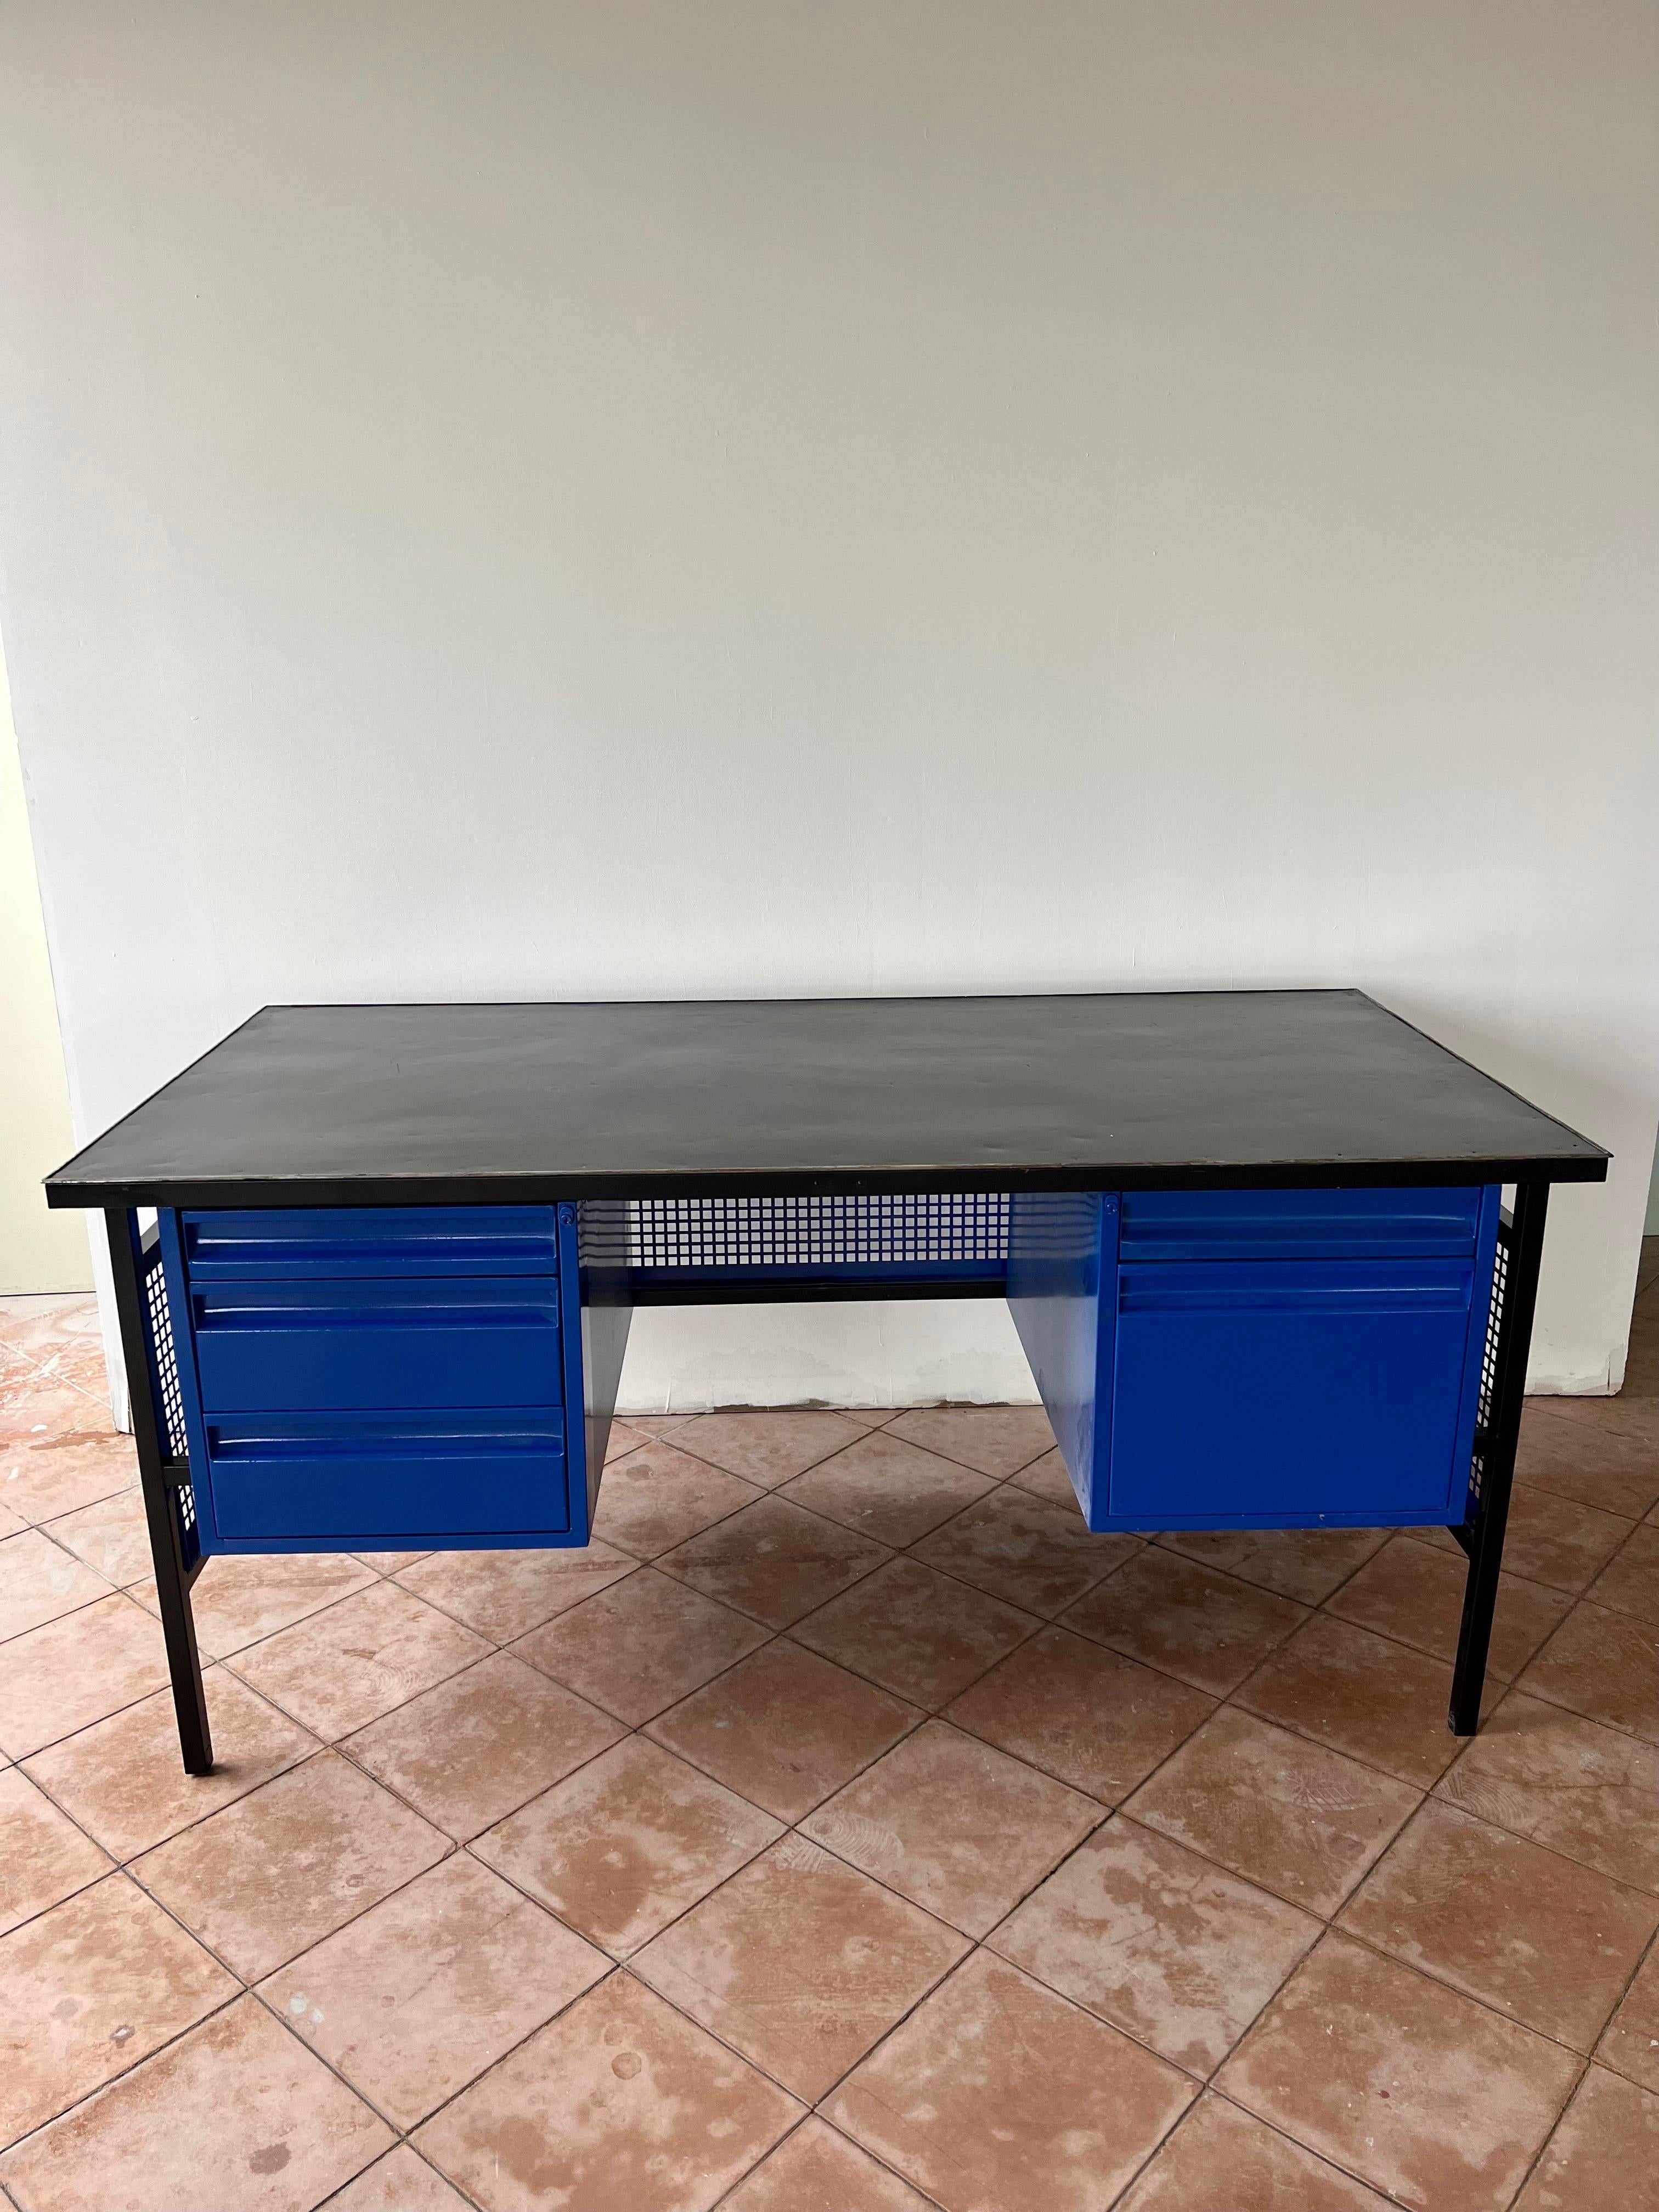 For your consideration, desk sadly attributed to Clara Porset, Diaz Infante is the real and original designer, I have the documents that support it, manufactured by DM Nacional.